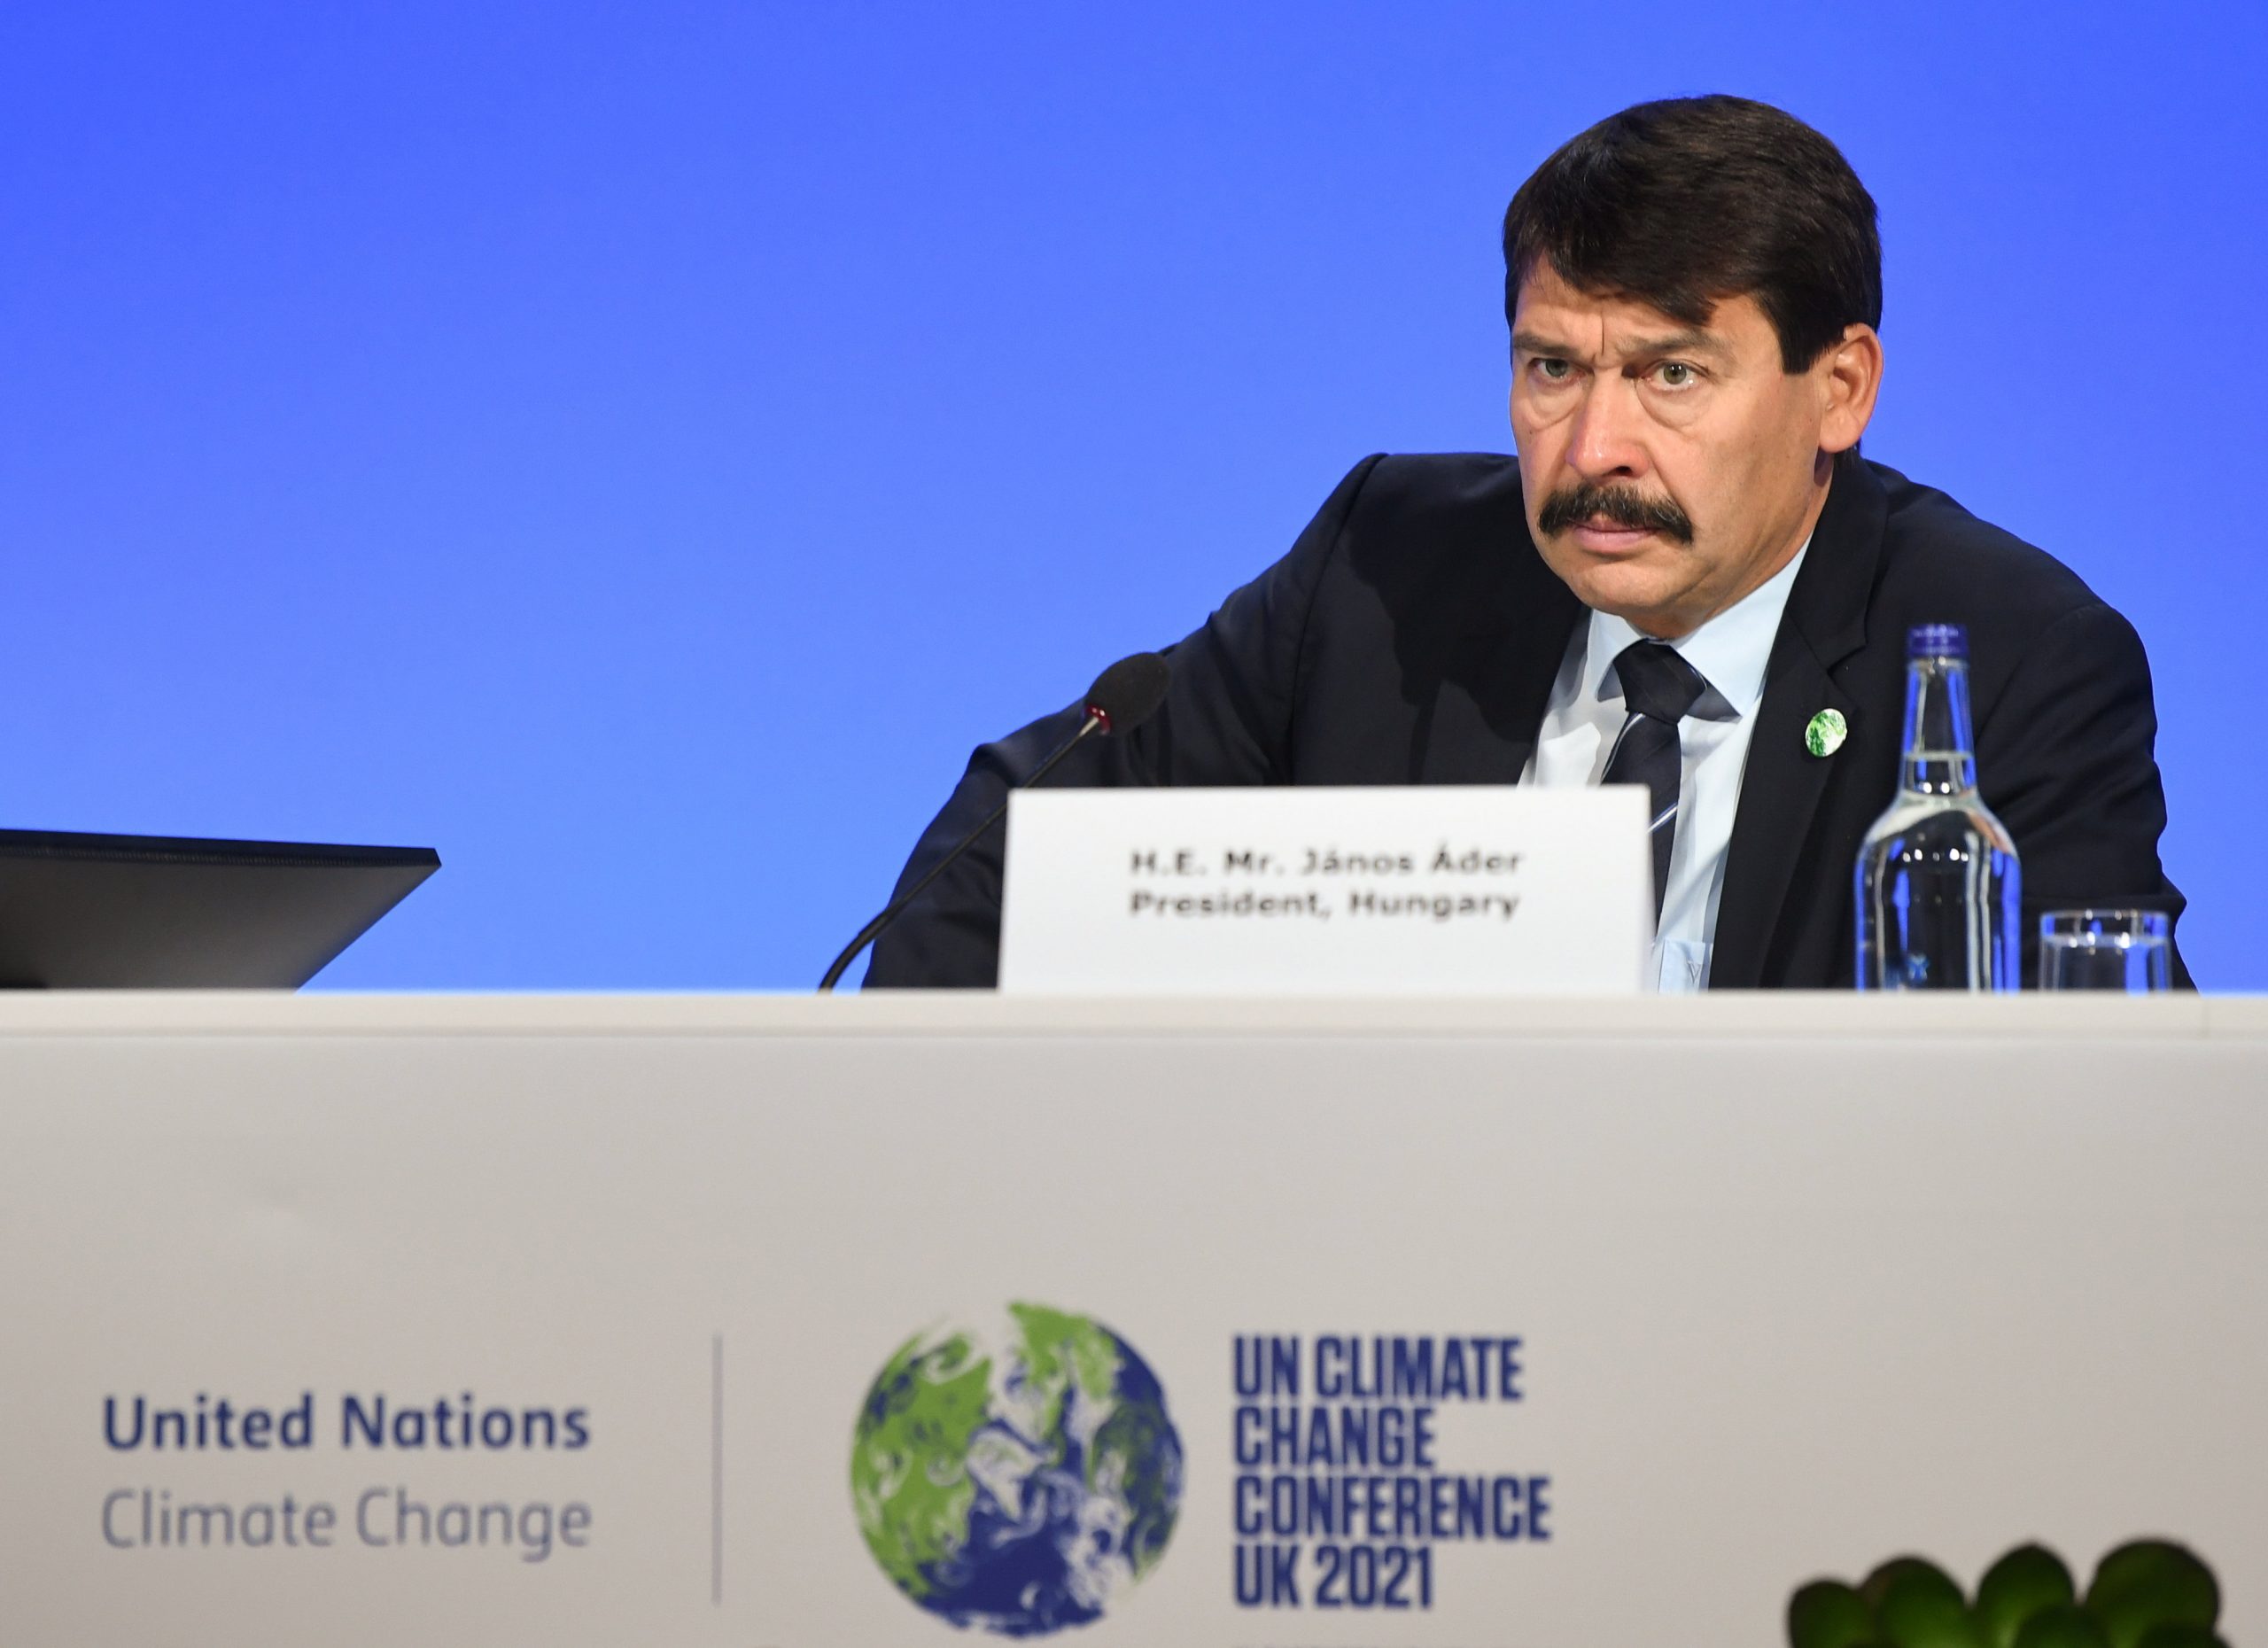 President Áder: Glasgow Climate Summit Short on Specific Commitments